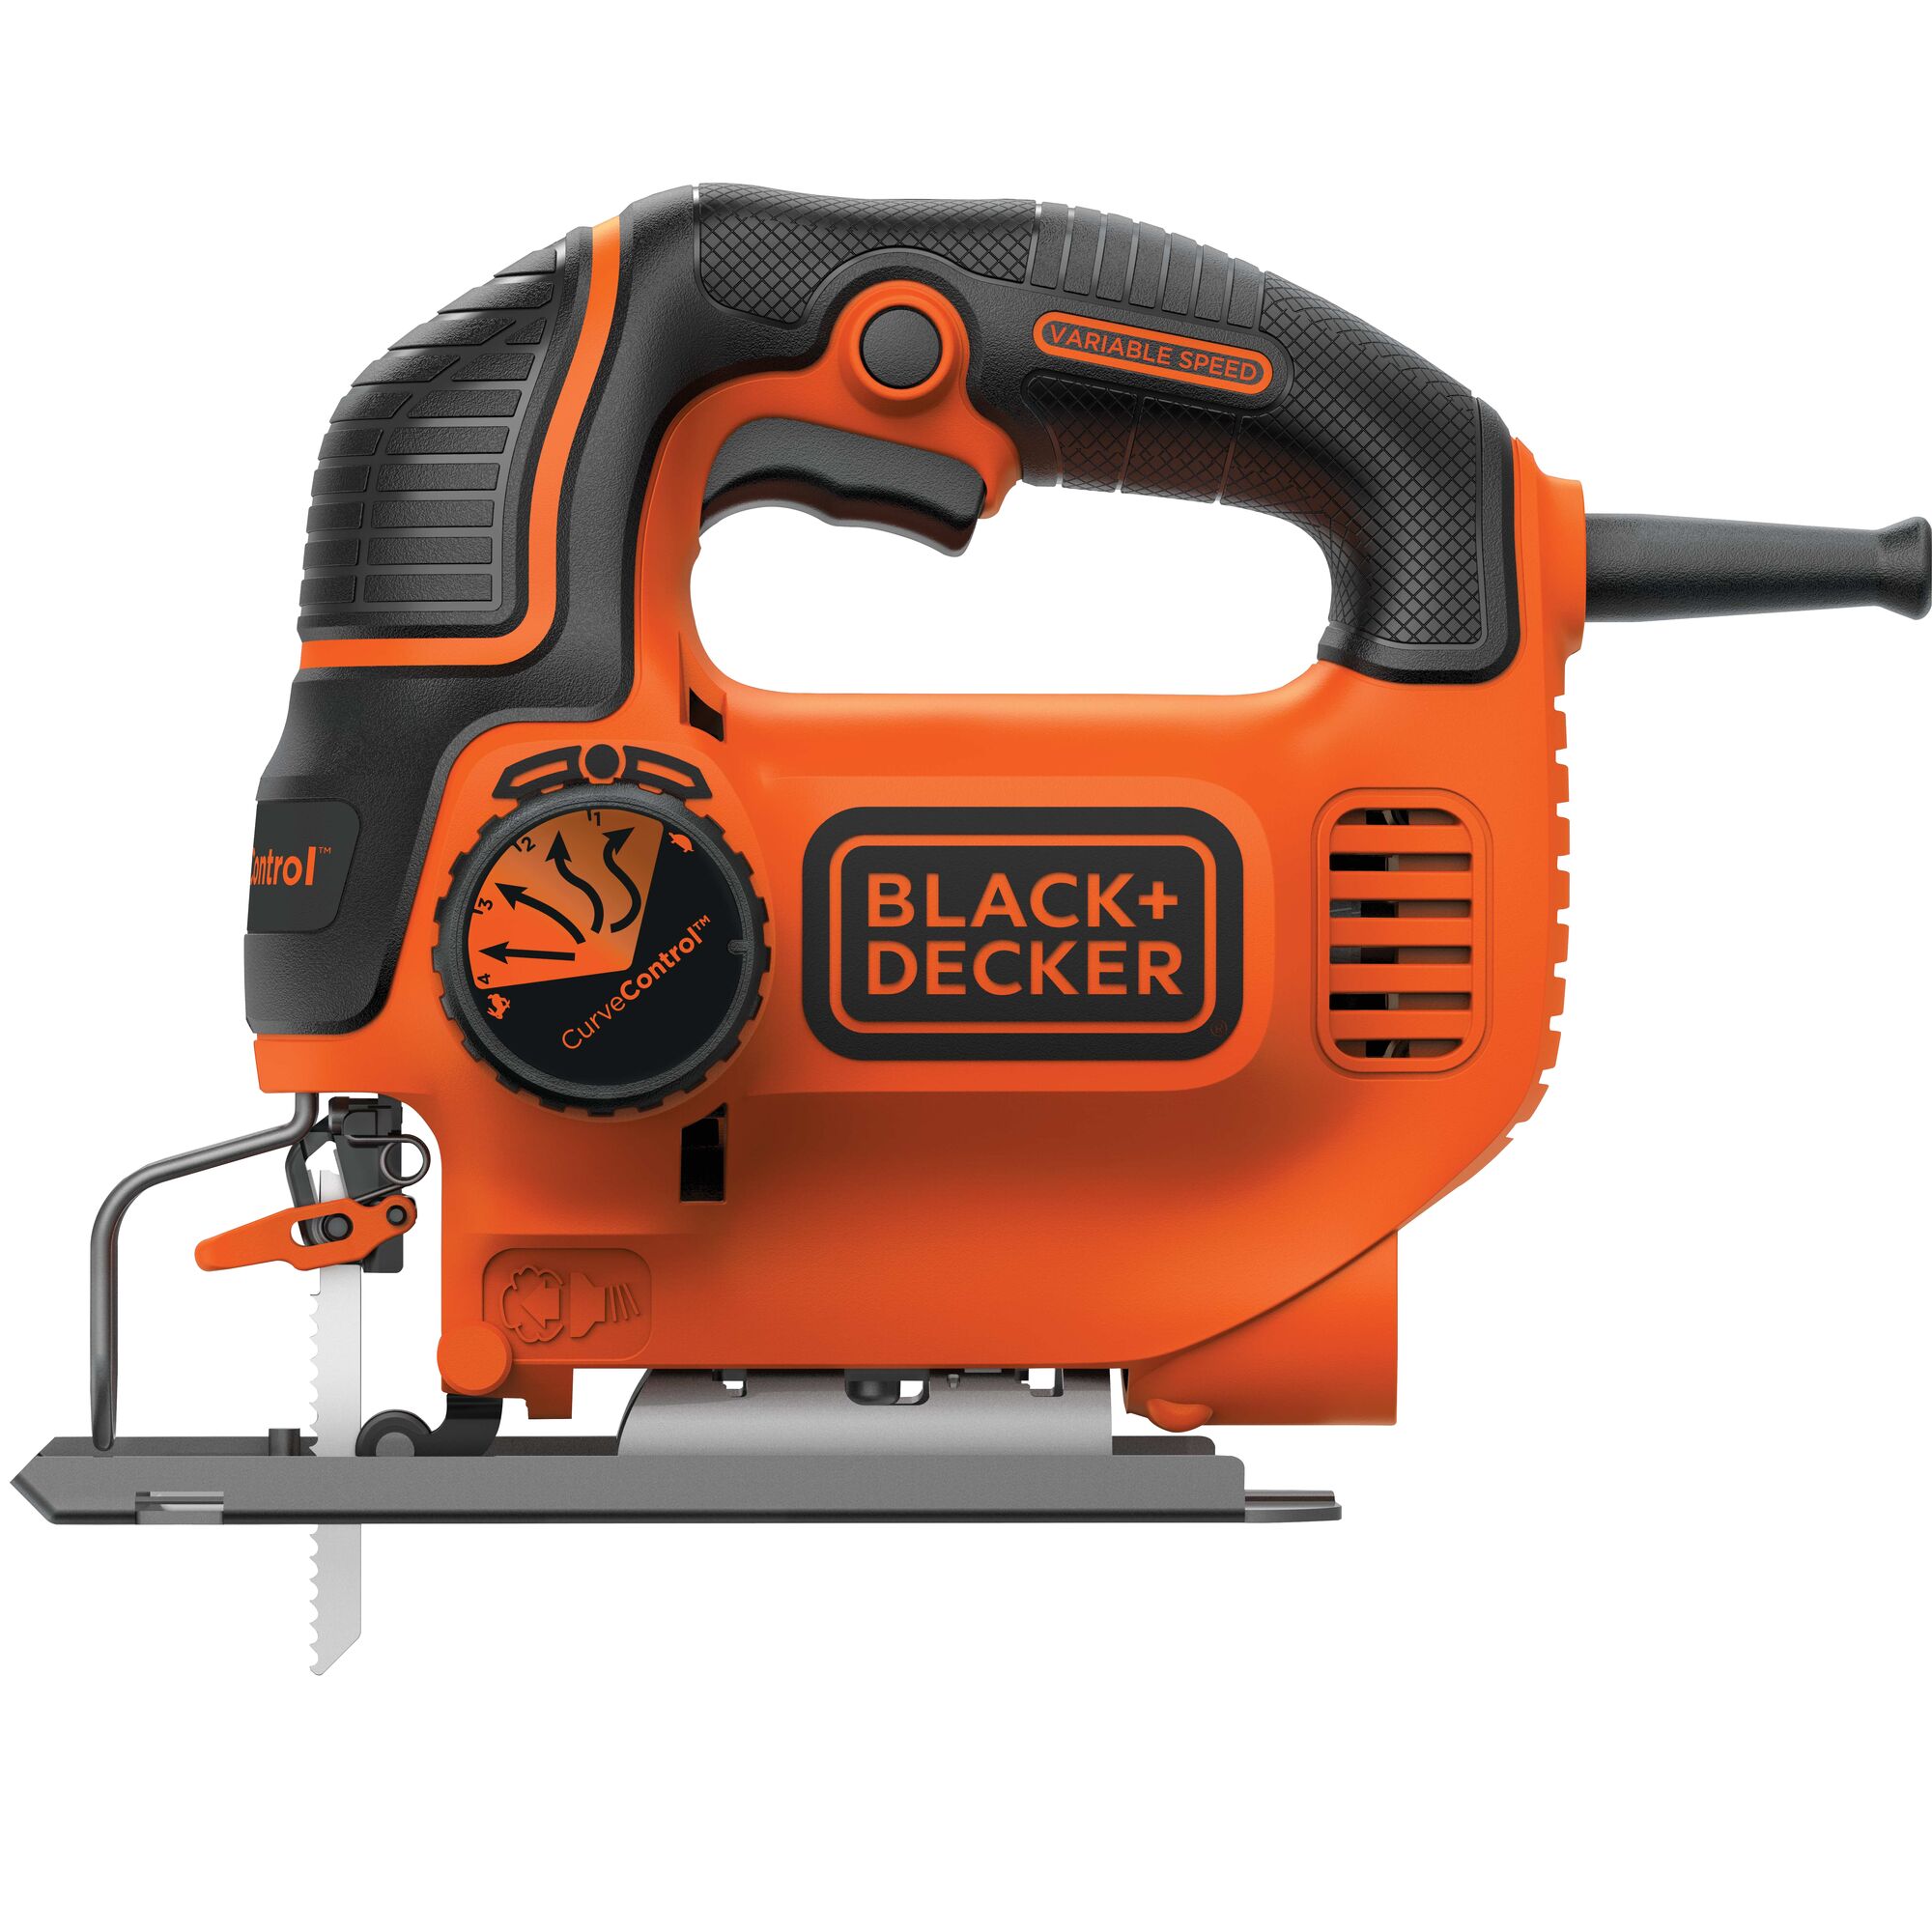 Right profile of black and decker jig saw smart select.